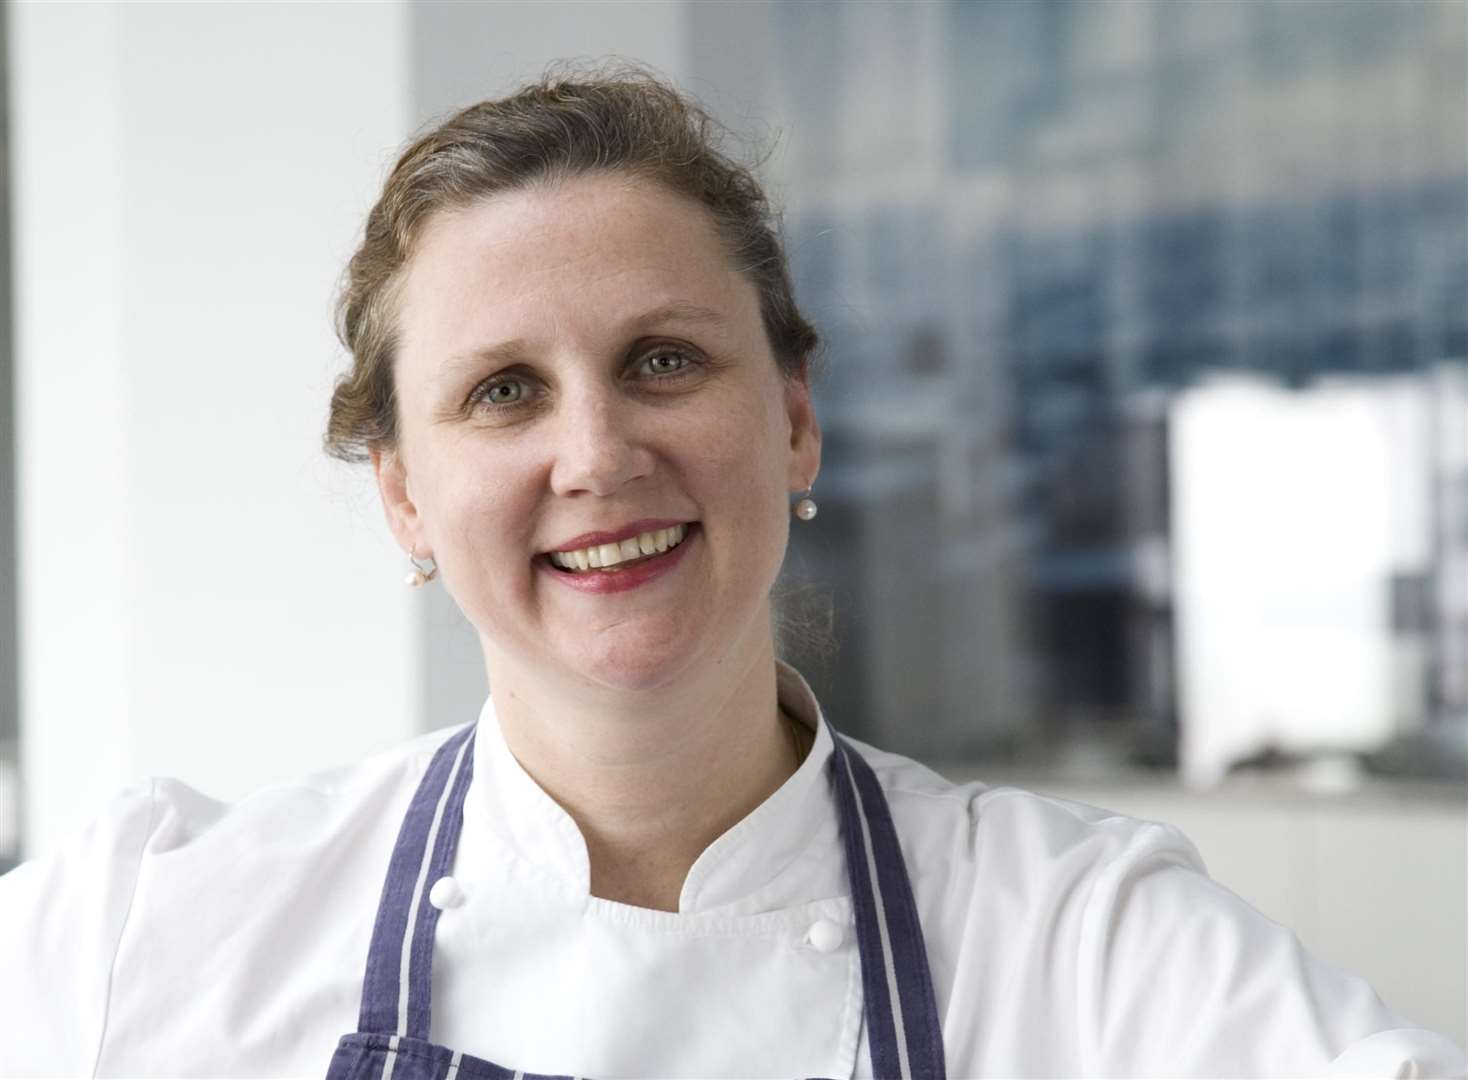 Saturday Kitchen chef Angela Hartnett will be hosting a feasting tent at the food festival. Picture: Camilla Davies